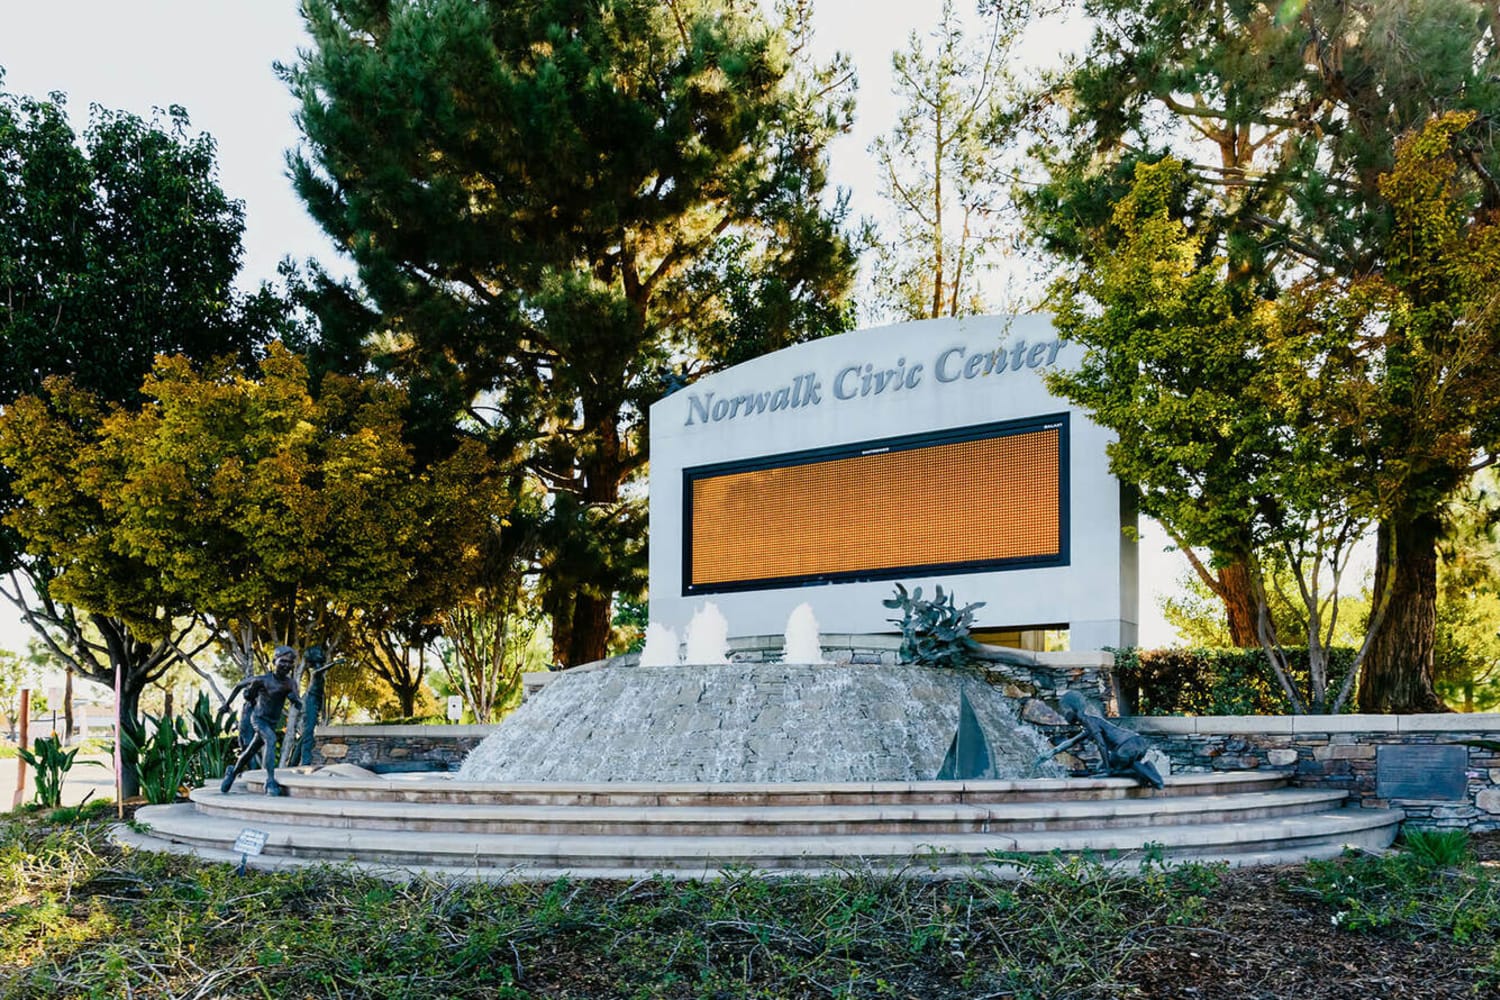 Signage for Norwalk Civic Center, near Alivia Townhomes in Whittier, California